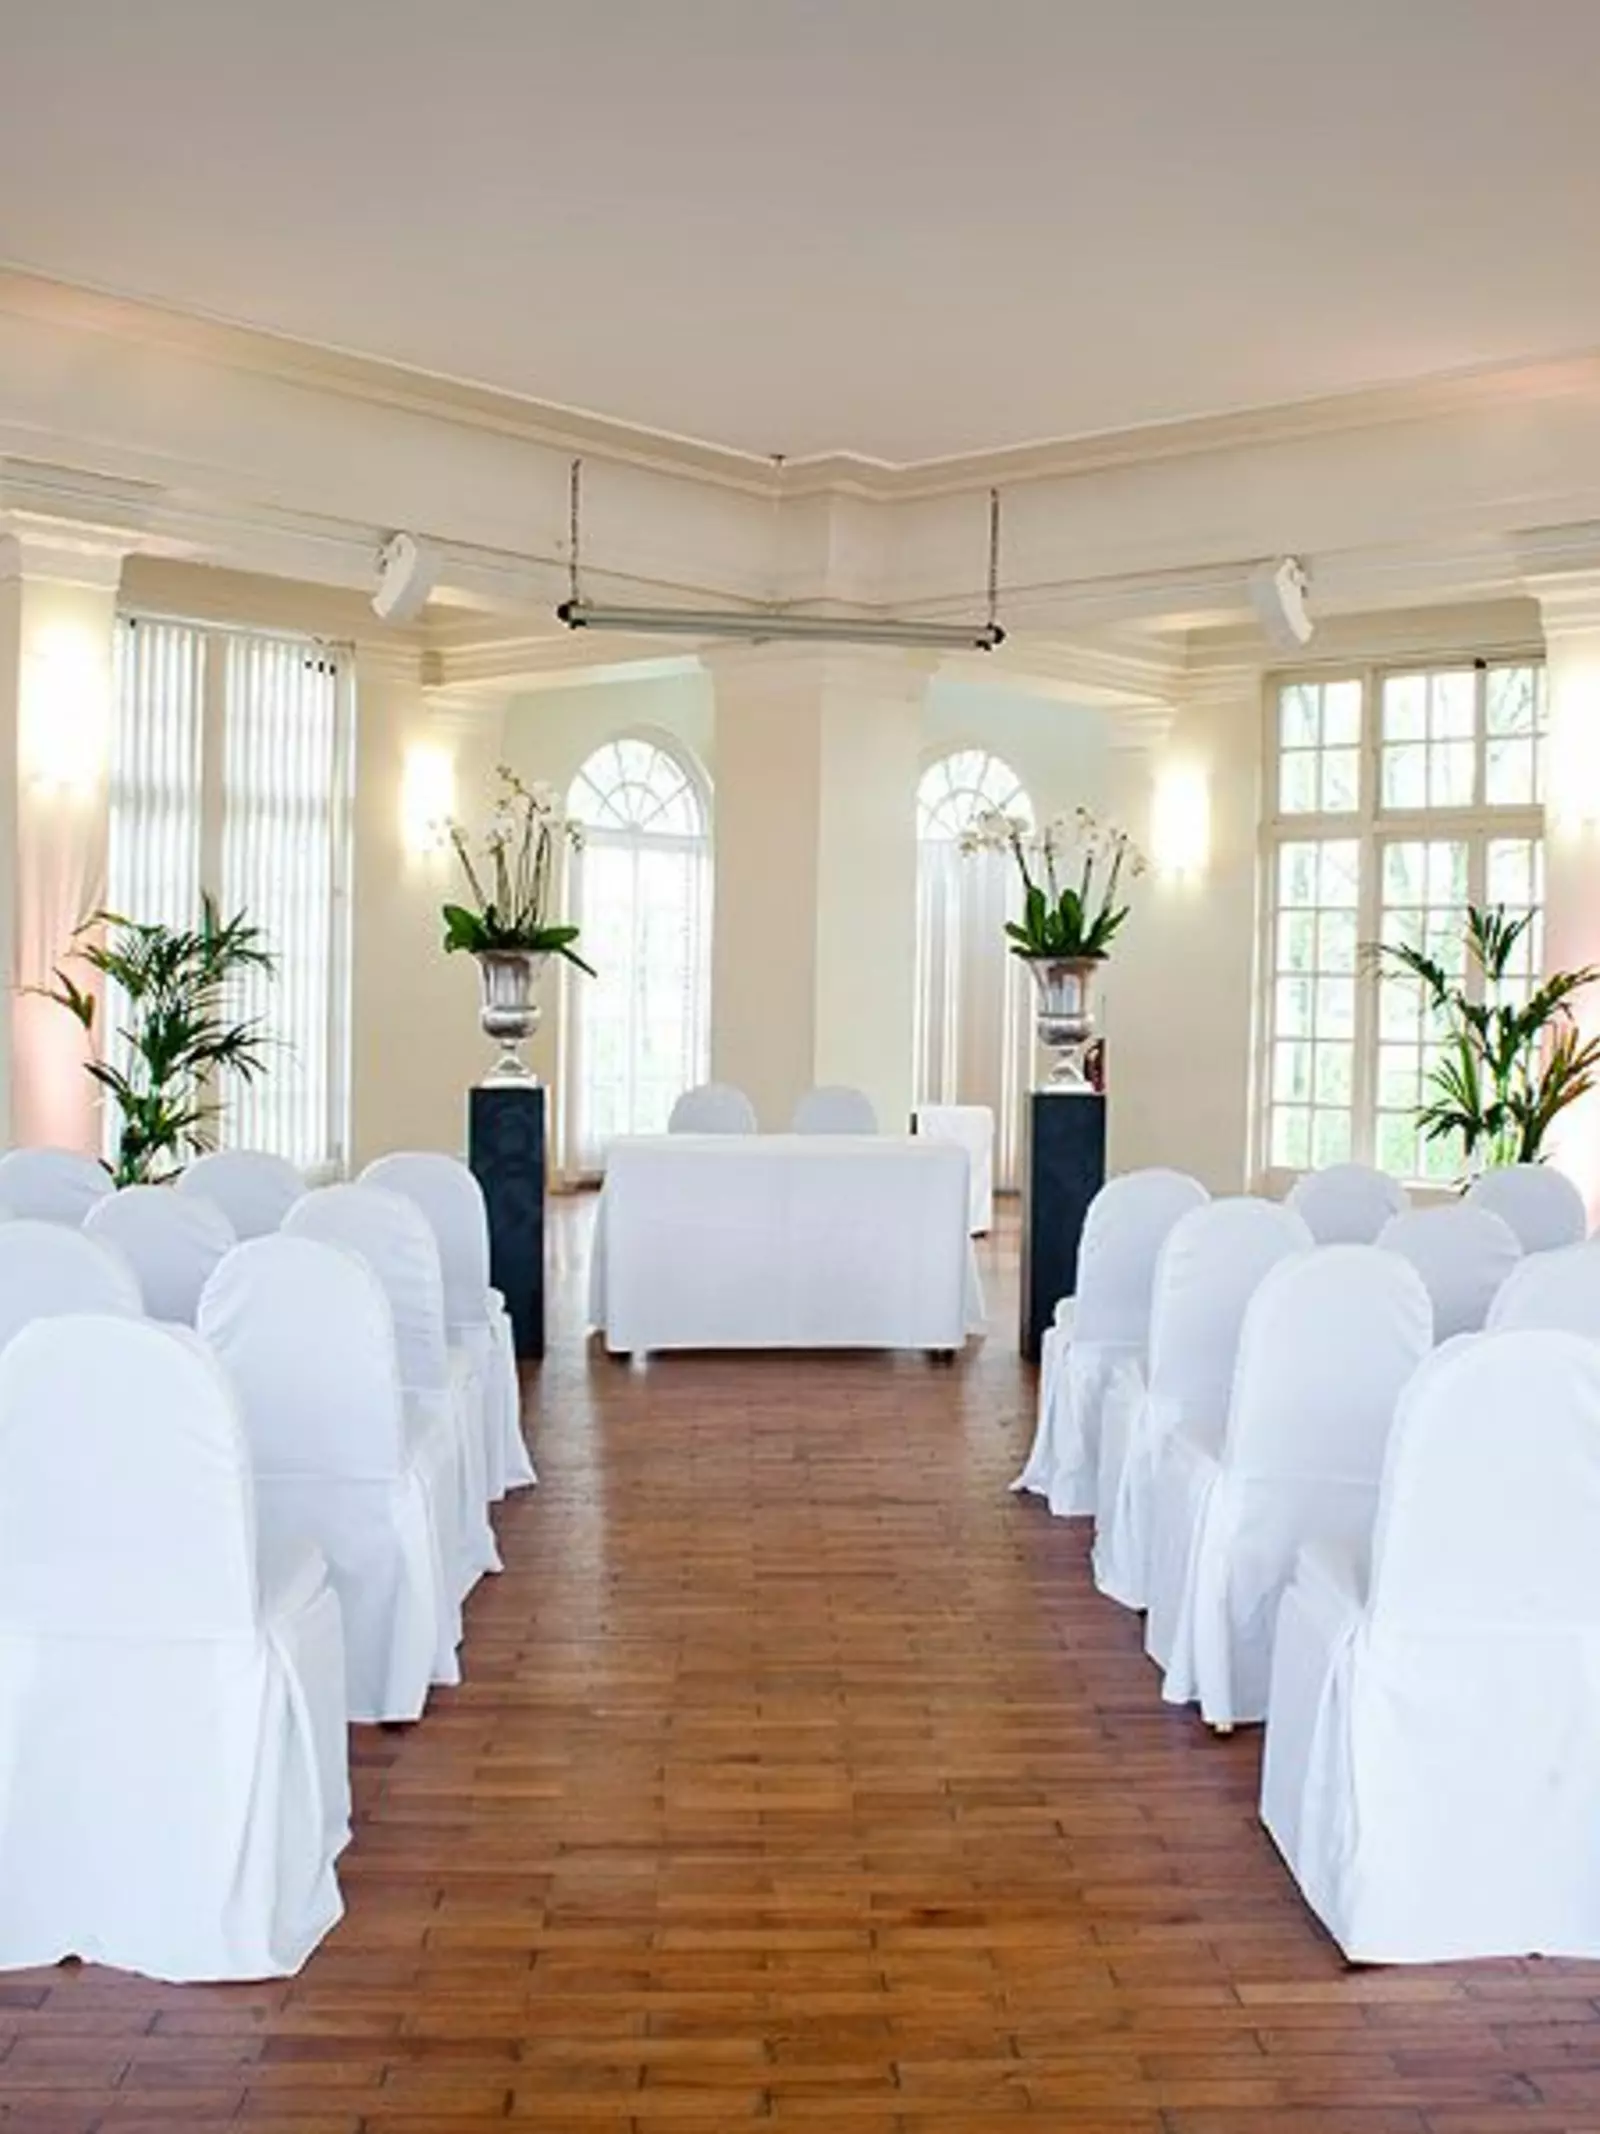 Mappin Pavilion set up for wedding ceremony with white chairs facing a table with two chairs side by side